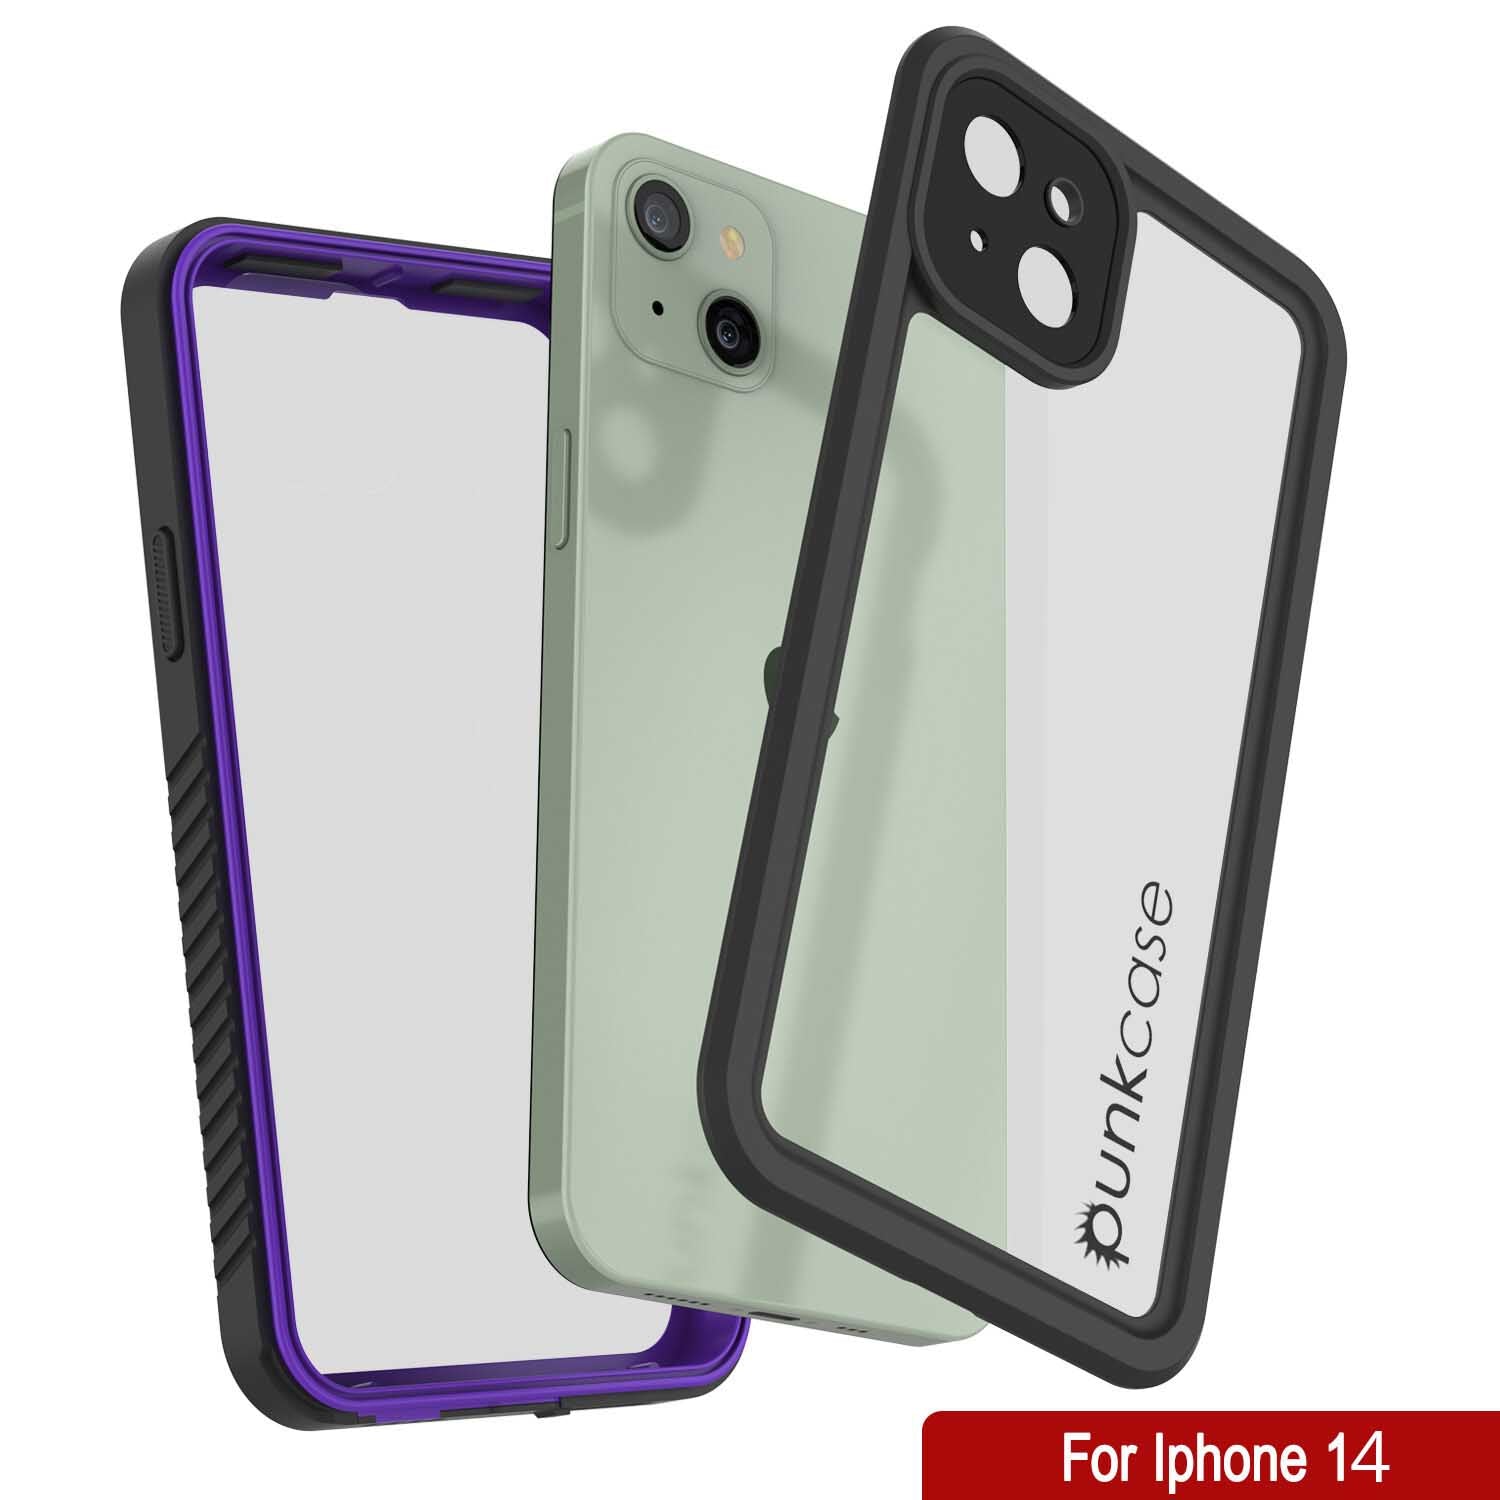 iPhone 14  Waterproof Case, Punkcase [Extreme Series] Armor Cover W/ Built In Screen Protector [Purple]